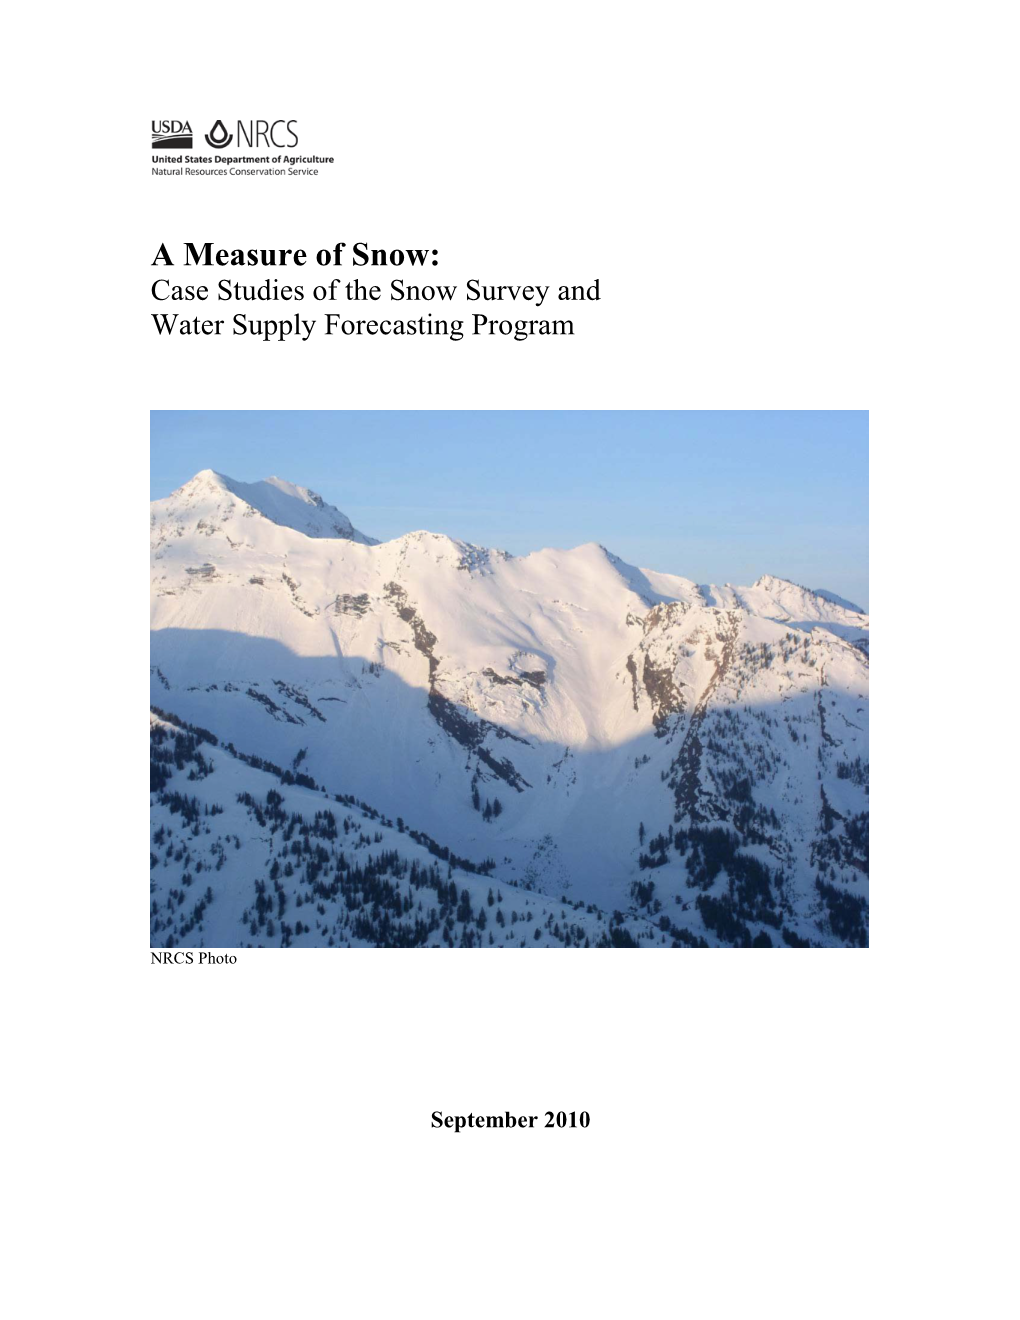 A Measure of Snow: Case Studies of the Snow Survey and Water Supply Forecasting Program